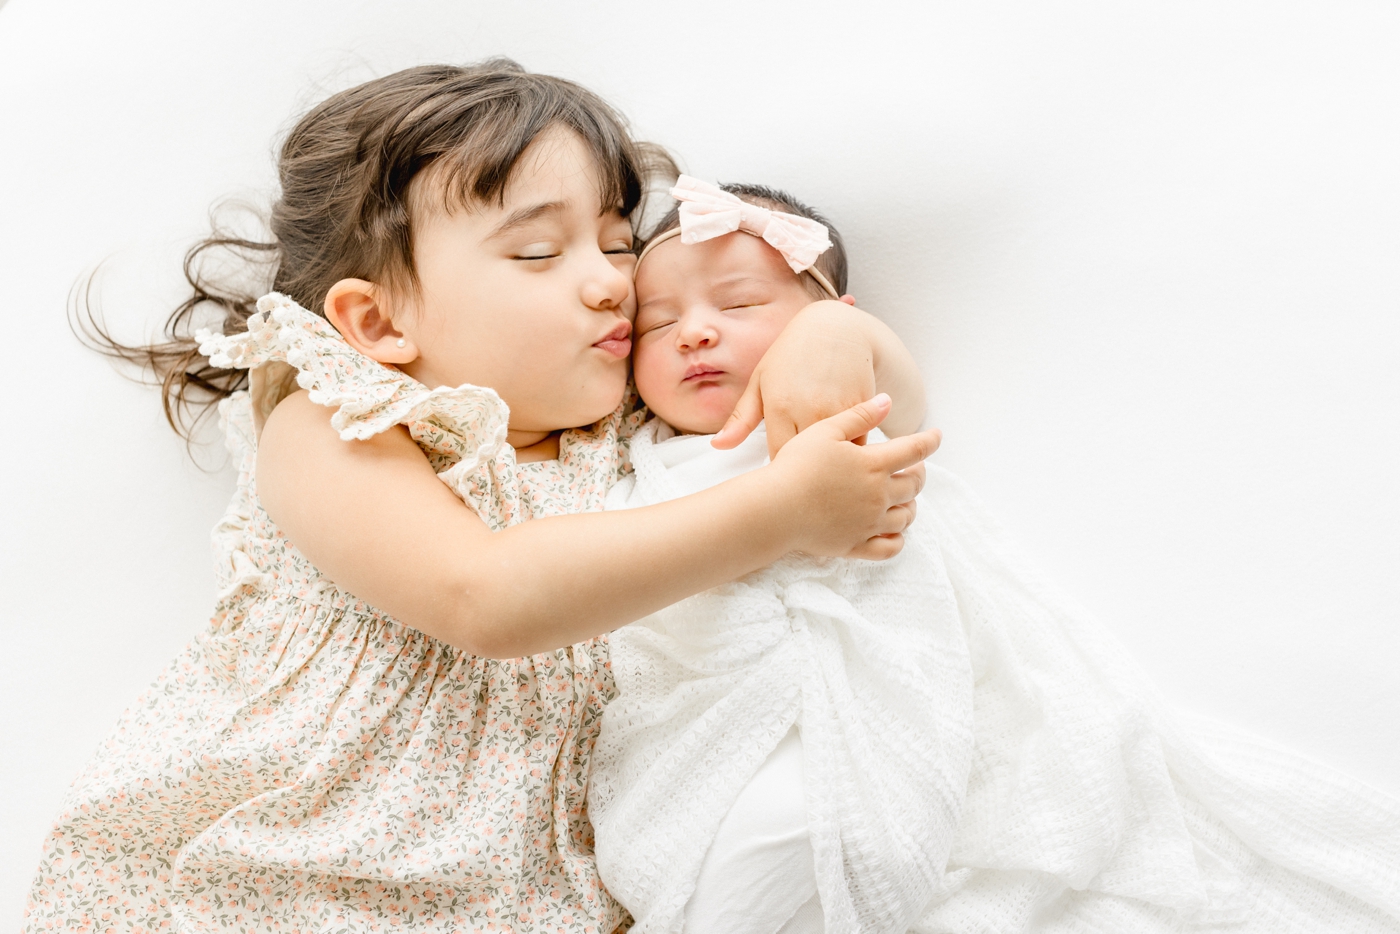 Big sister holding and kissing baby sister. Photo by Cedar park newborn photographer,Sana Ahmed Photography.